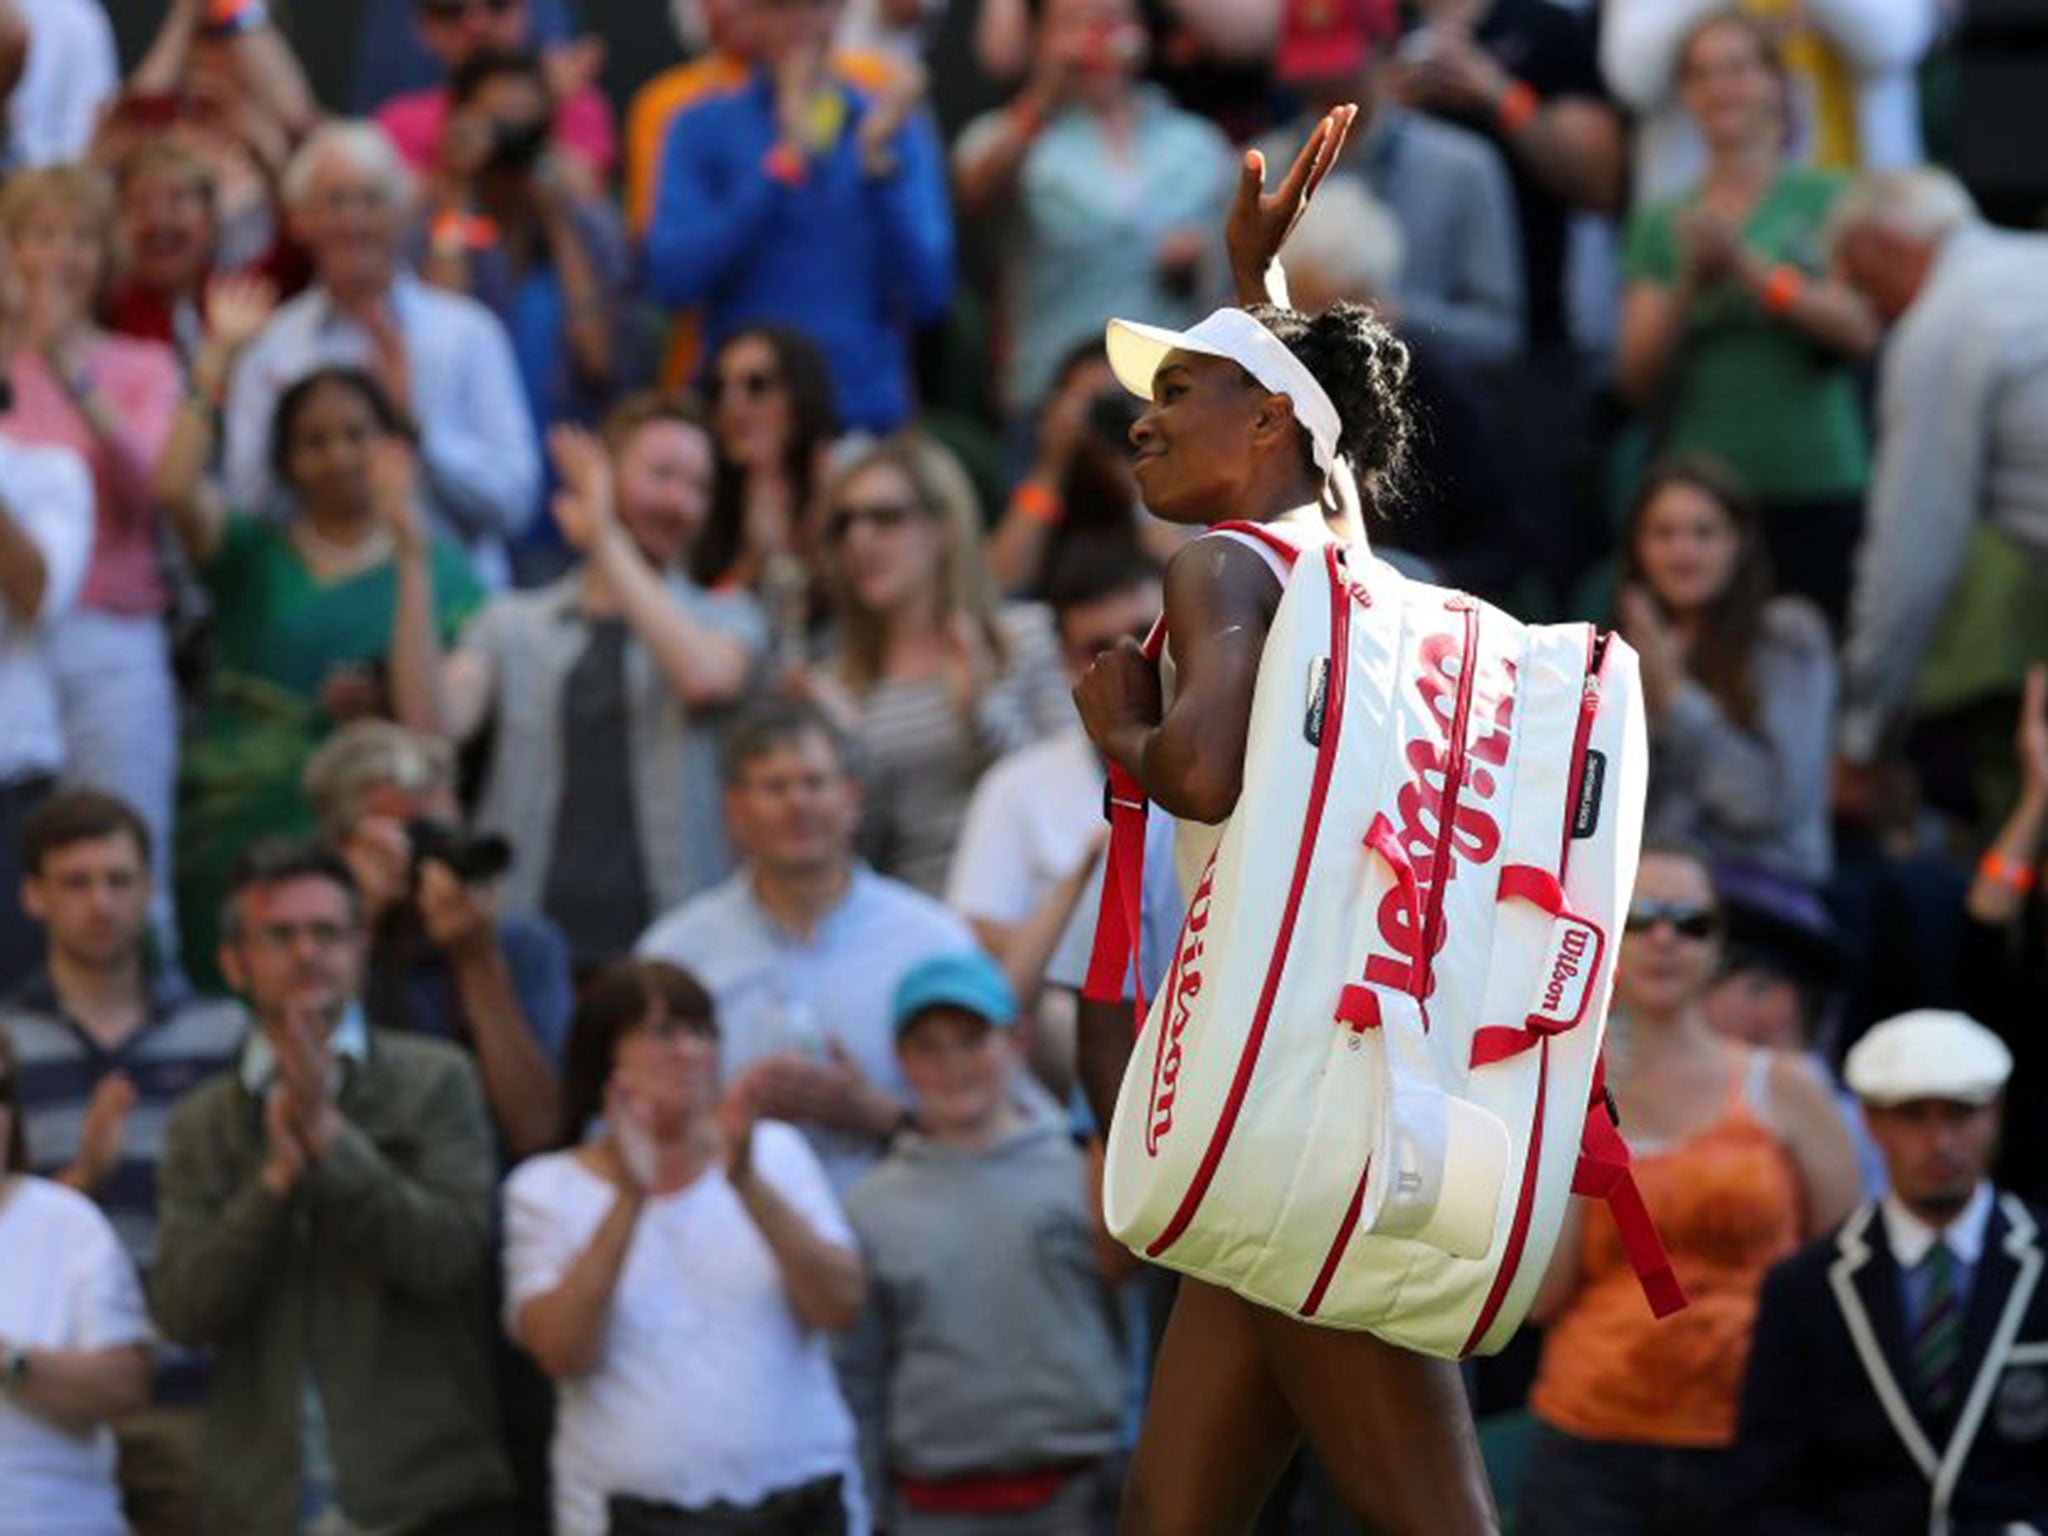 There was a tinge of extra emotion on Centre Court as Venus Williams bowed out for what might be the last time